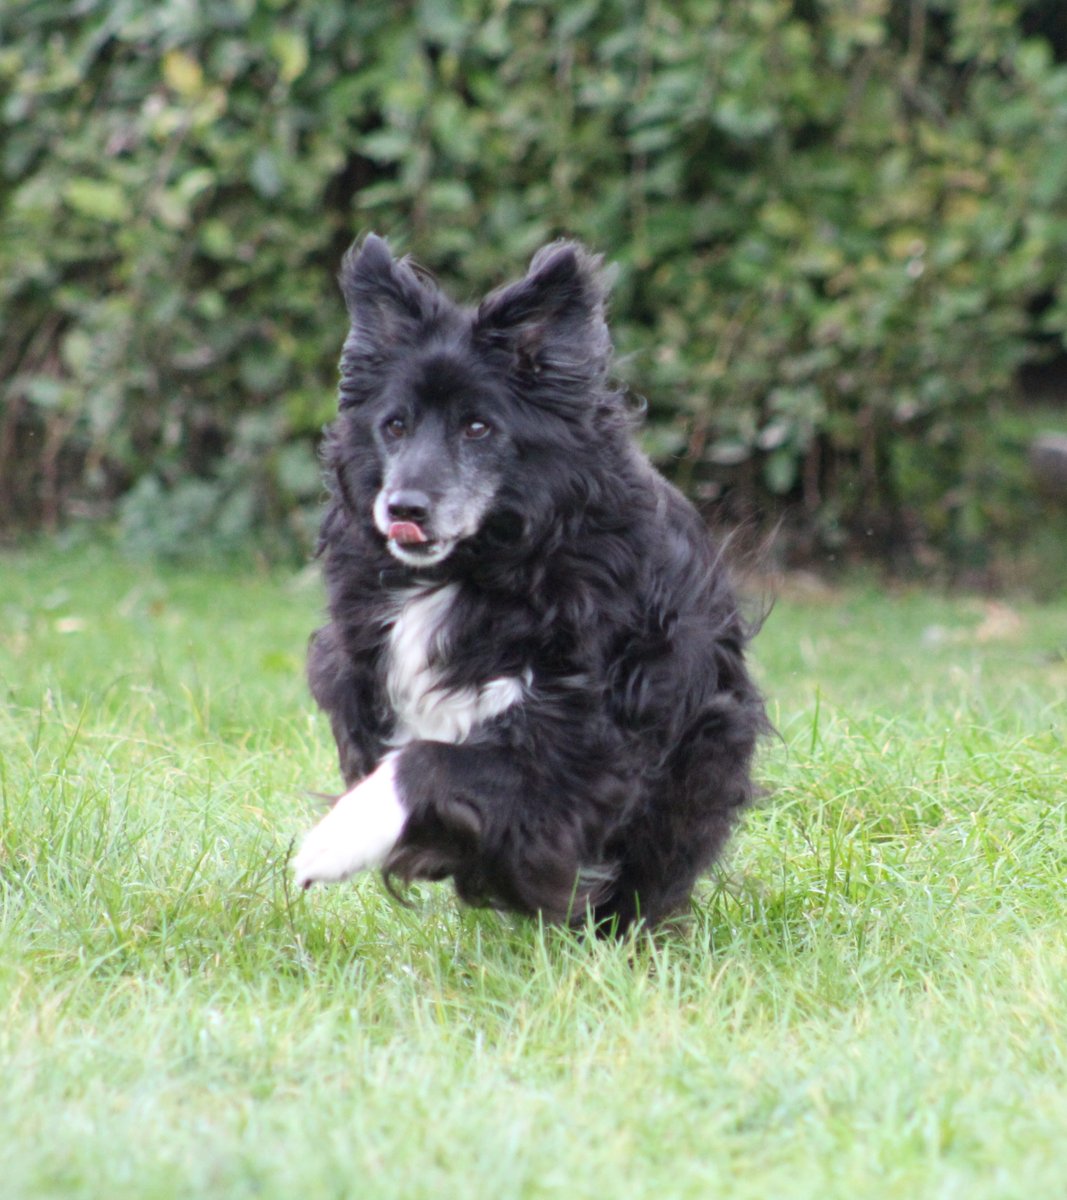 One of our golden oldies @FOSTBCrescue enjoying feeling young.
#goldenoldies #retireddogs #bordercollies #sanctuarydogs